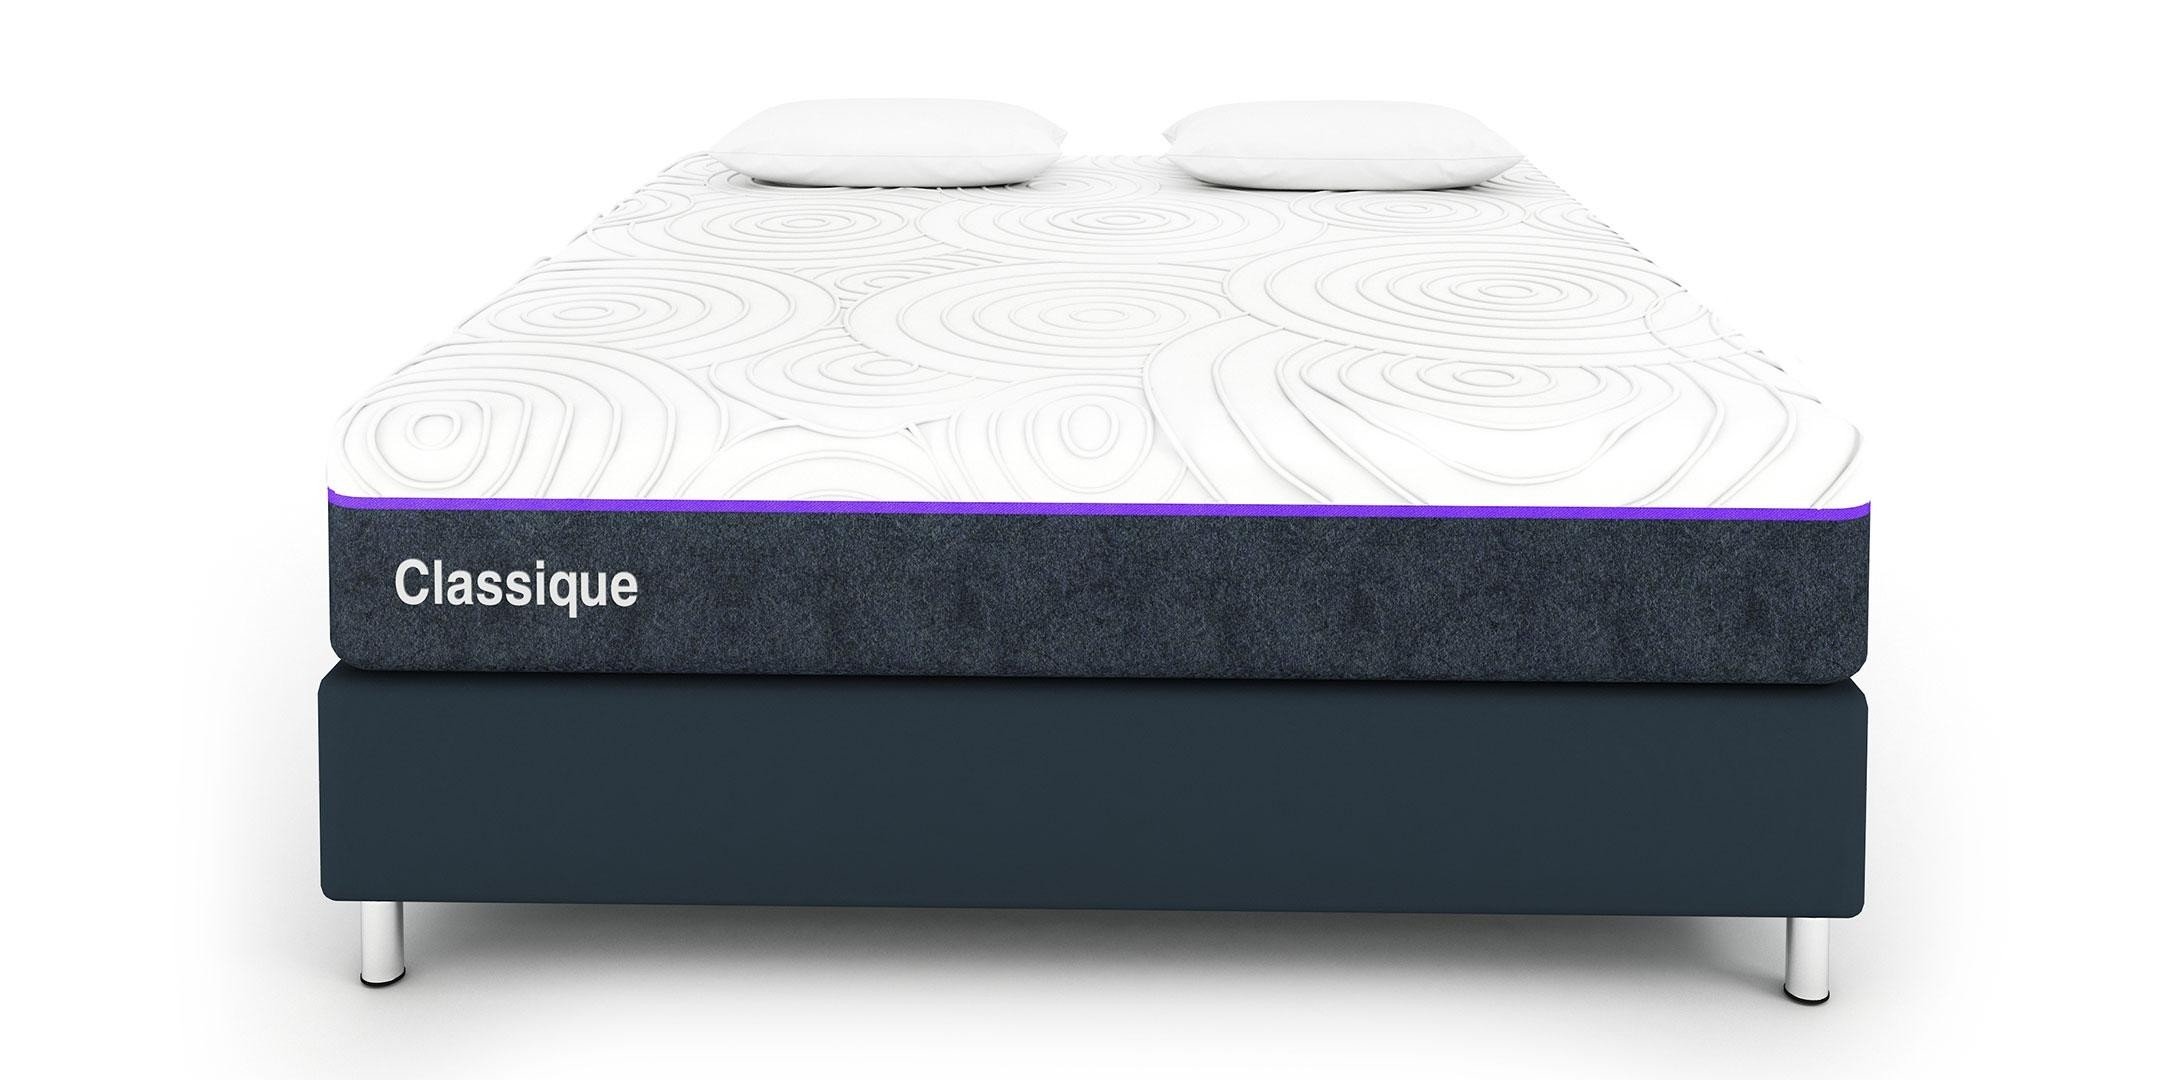 master molty foam double bed mattress price